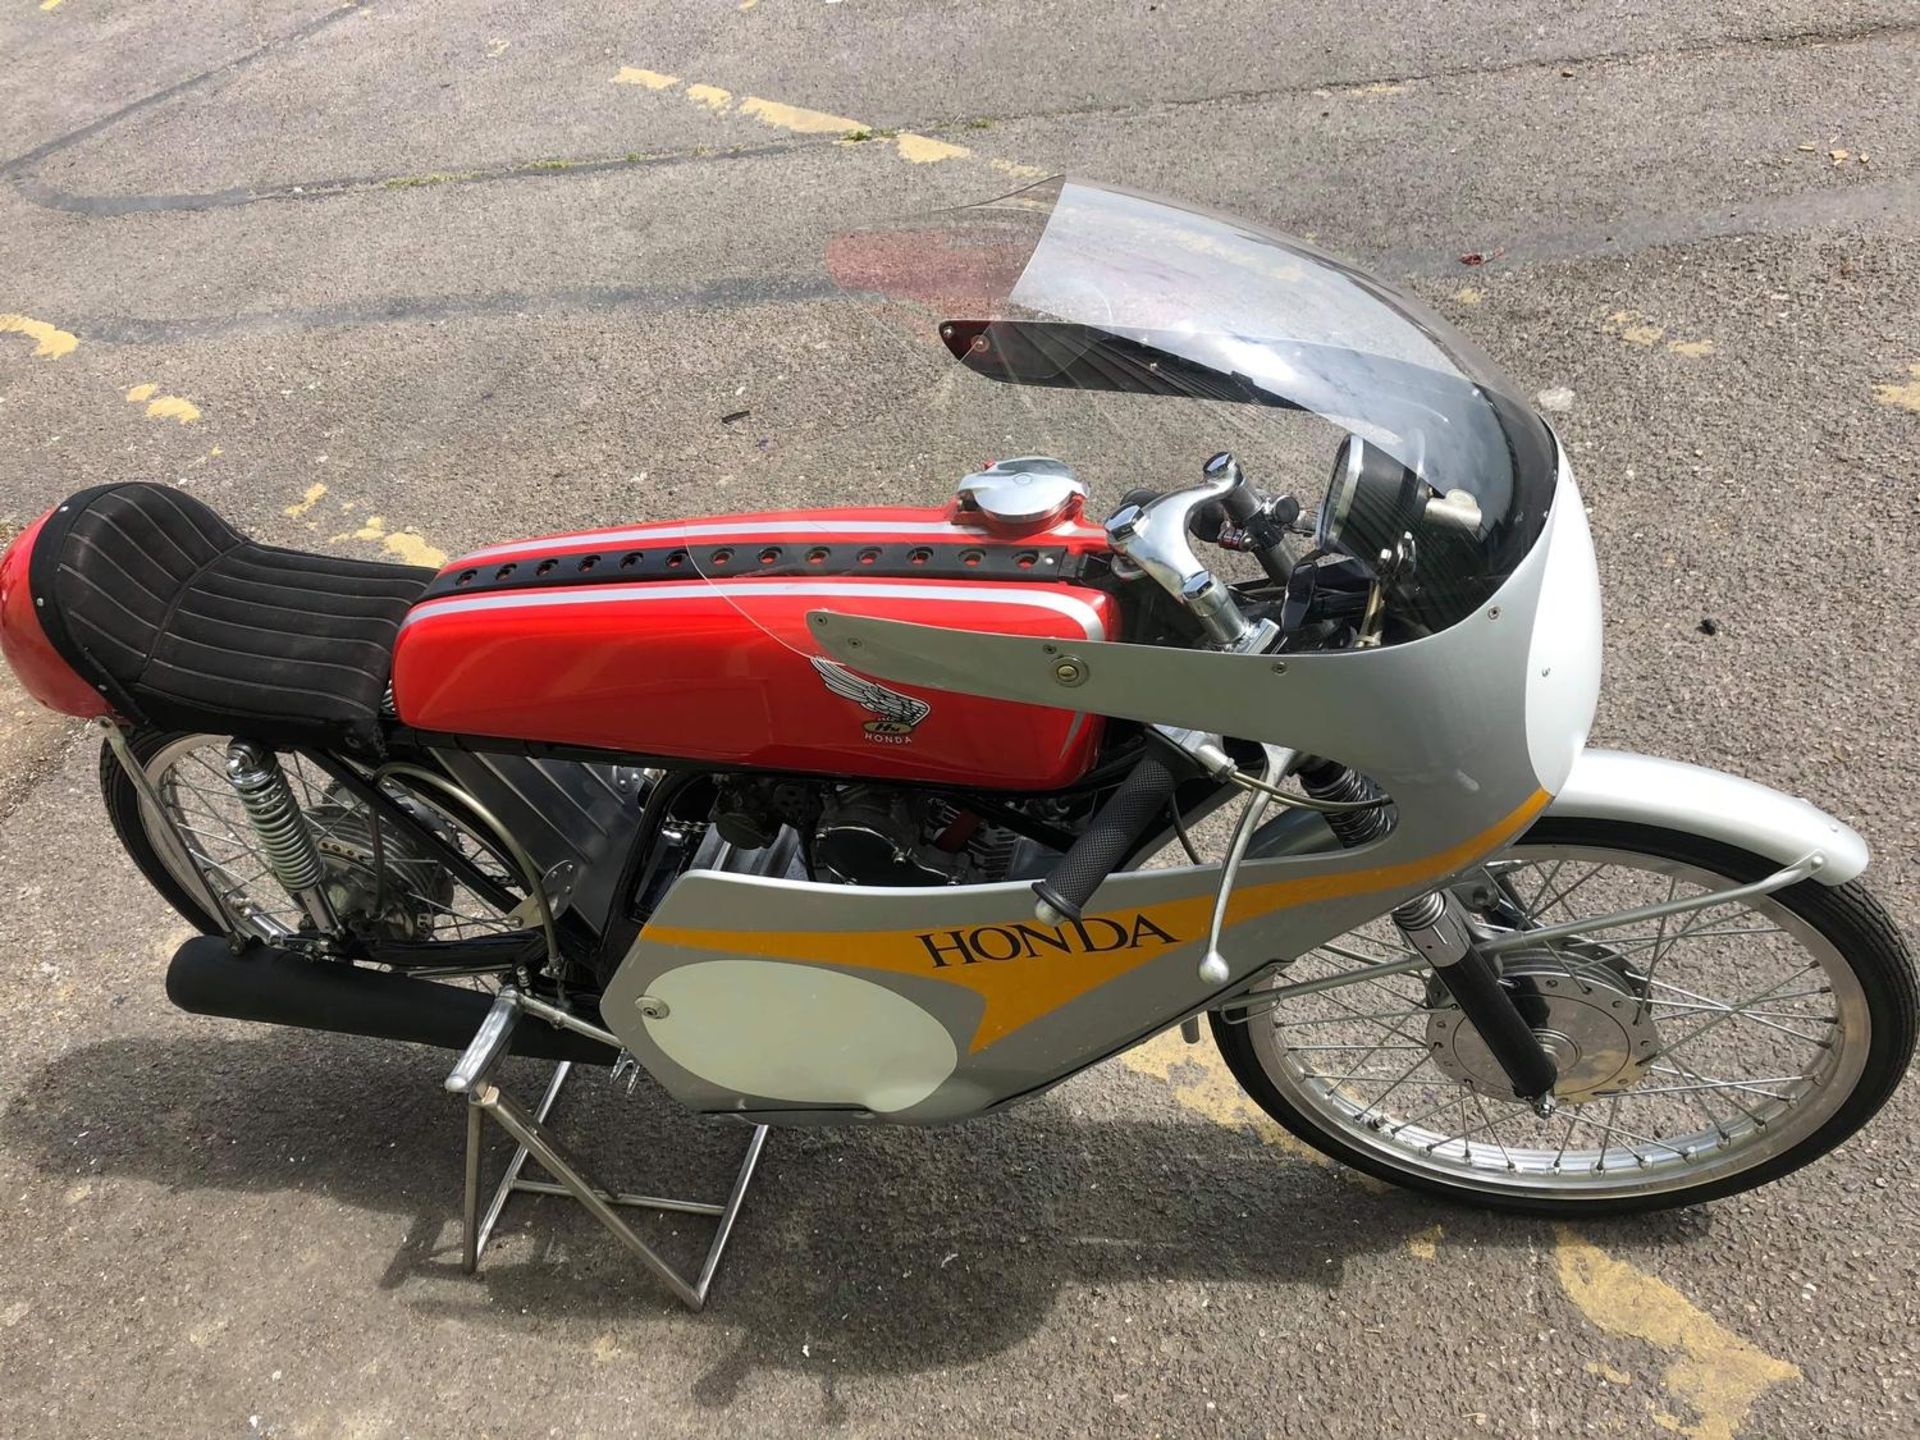 A 1962 Honda CR110, unregistered, red. Honda?s jewel like 50cc production racer was offered to - Image 2 of 3